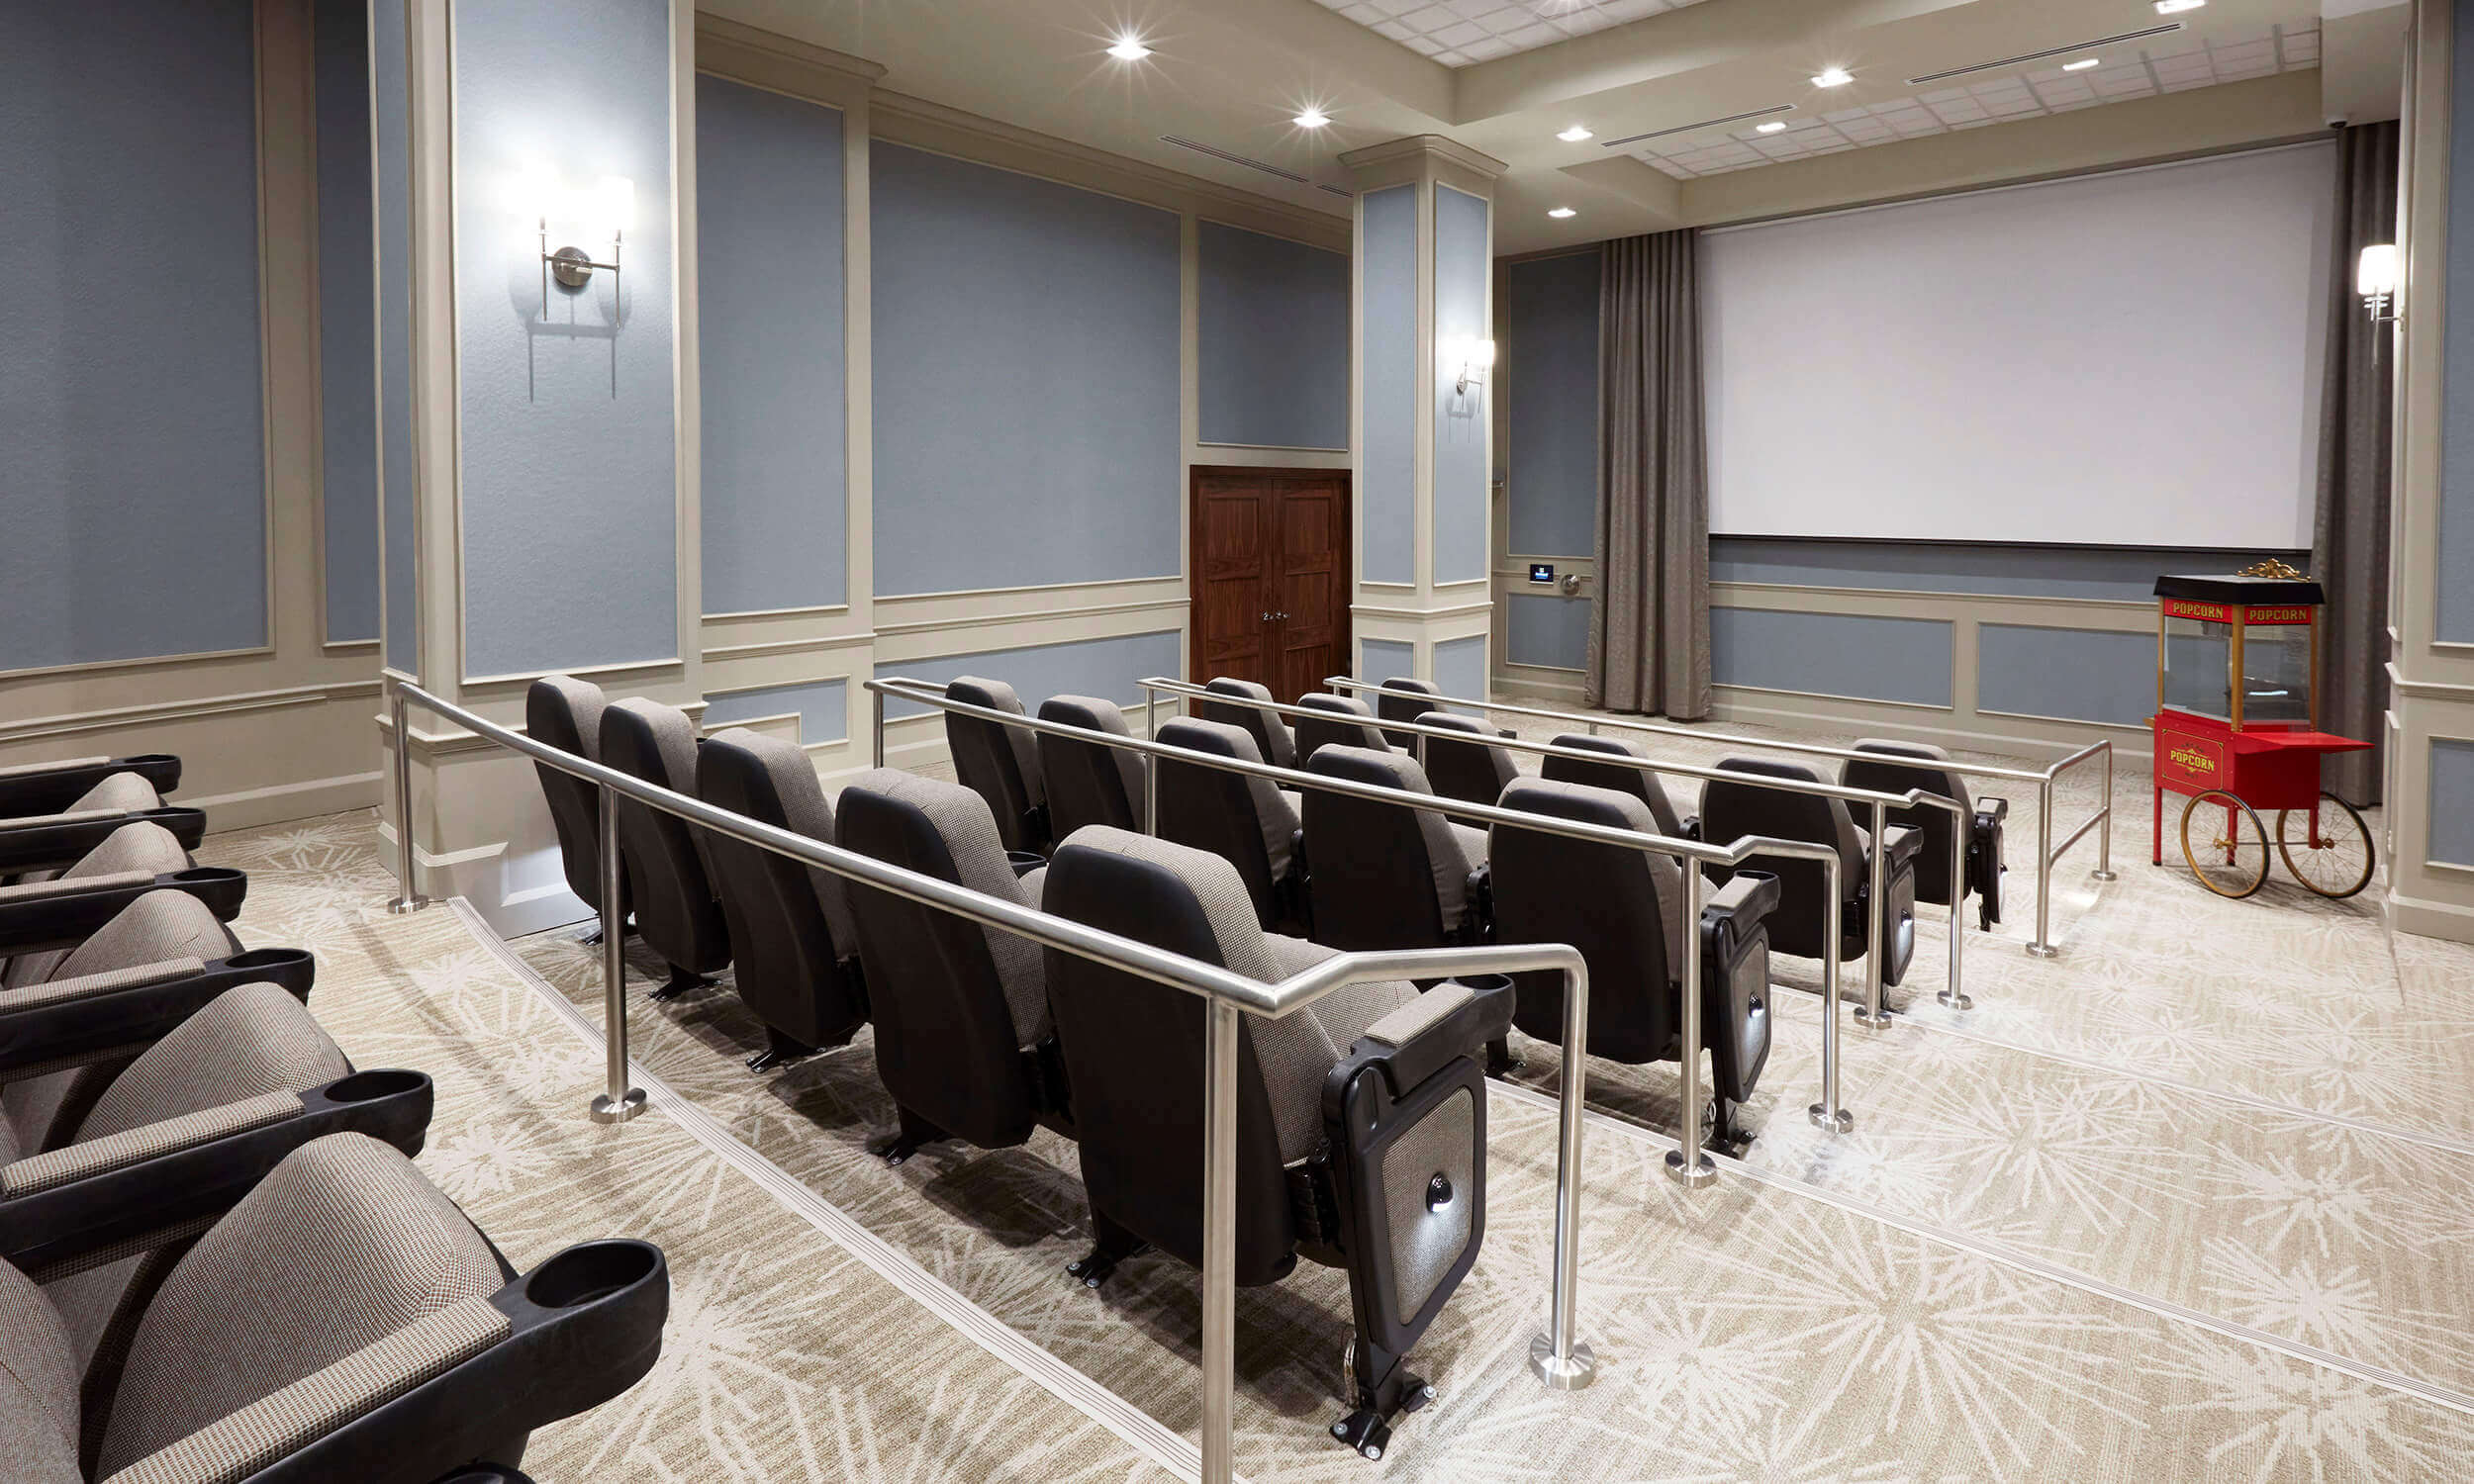 Entertainment room of retirement home with large movie screen  and rows of seating